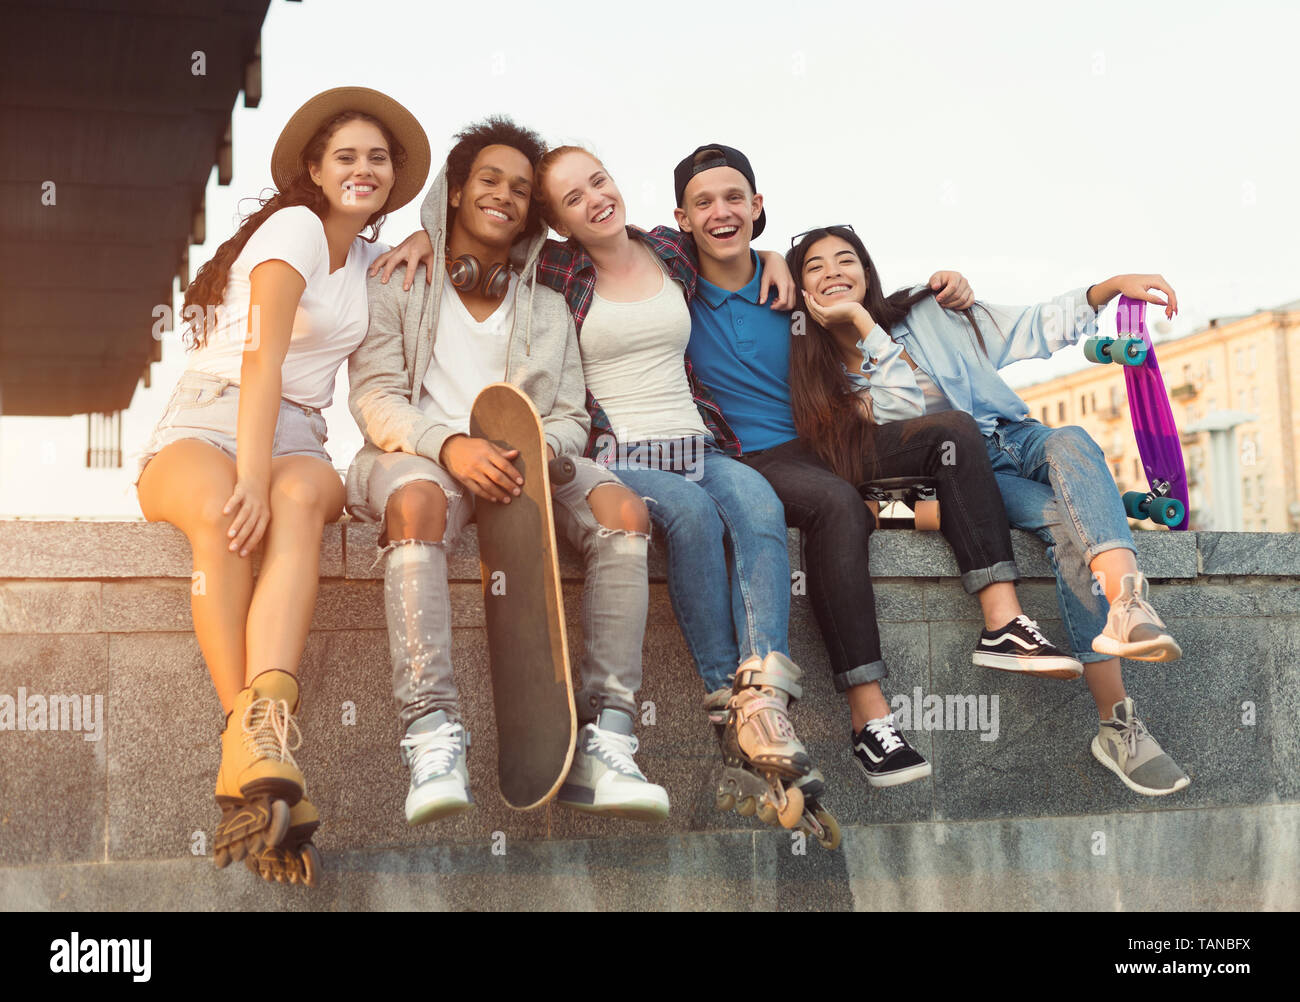 Group of active teenagers laughing together, city evening Stock Photo